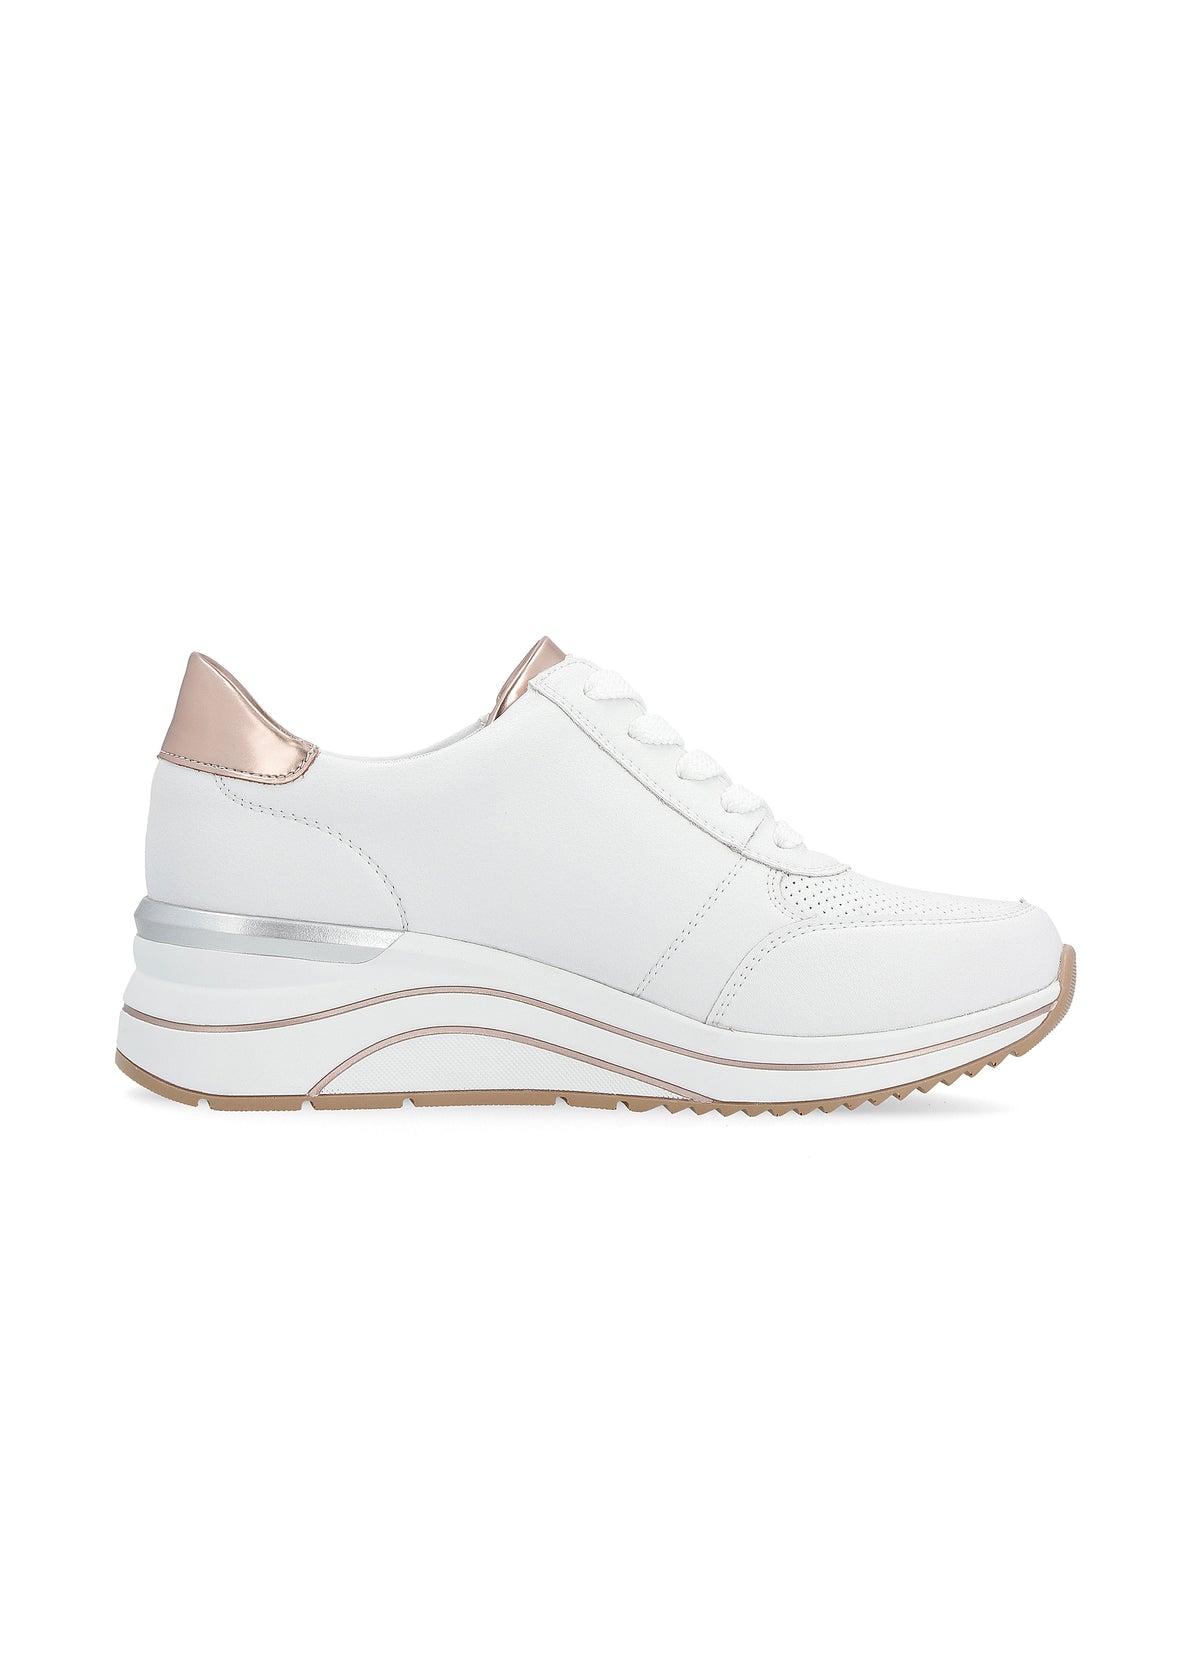 Sneakers with a wedge sole - white, copper-colored details